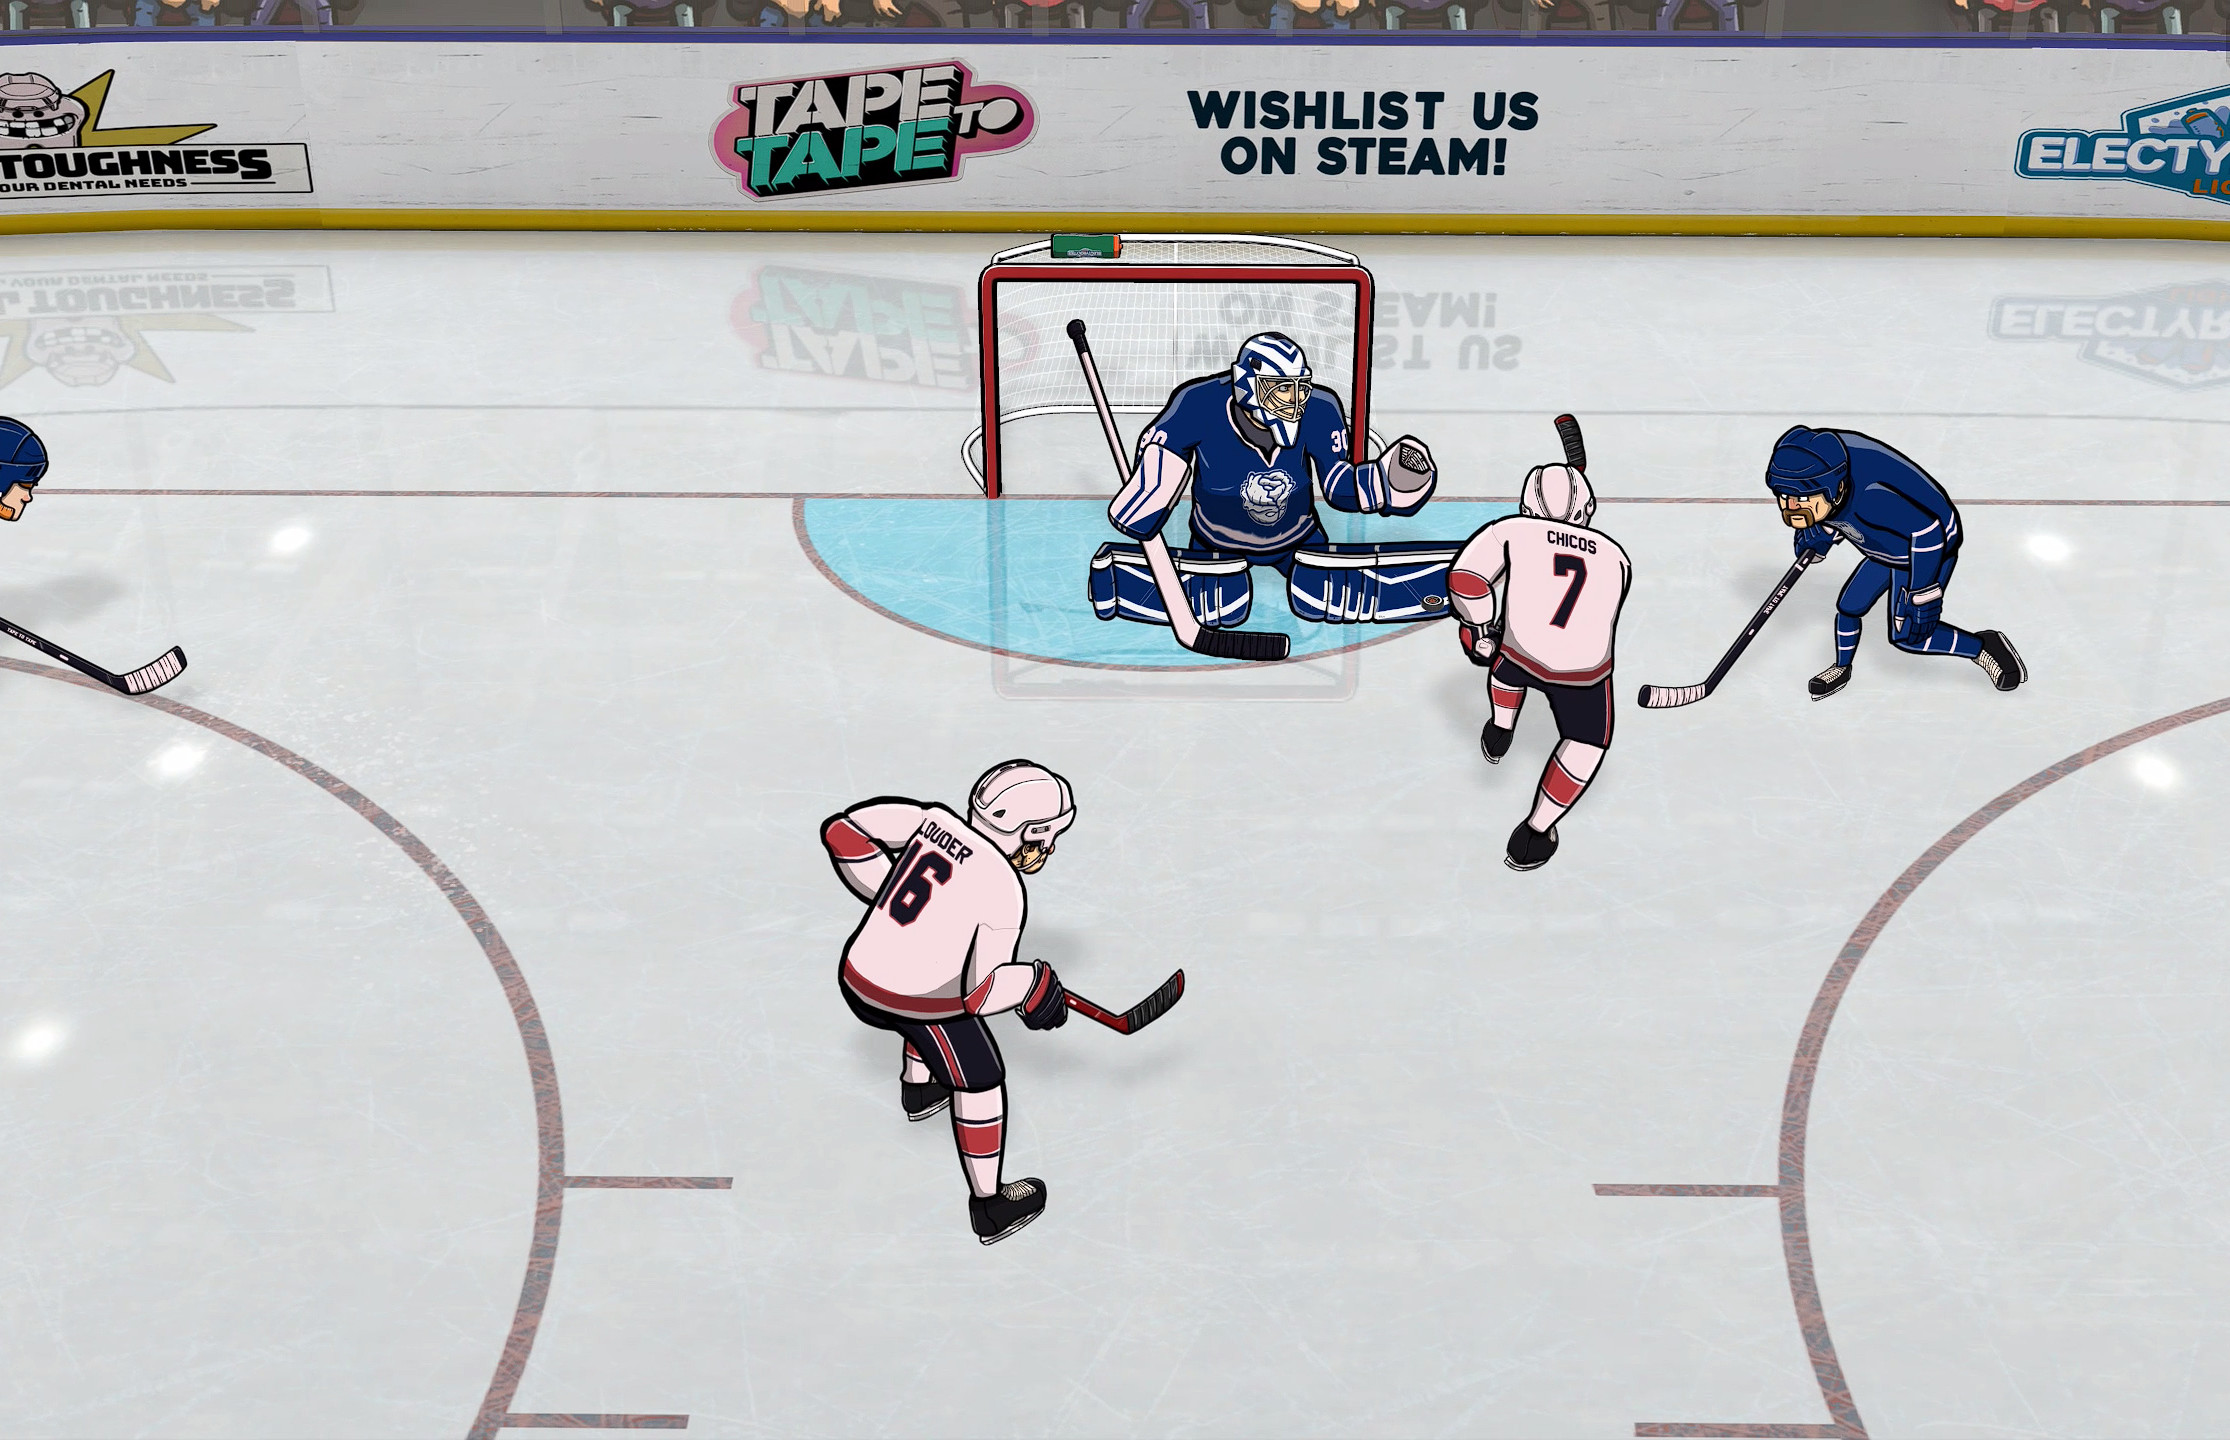 The quest to make a great PC hockey game continues